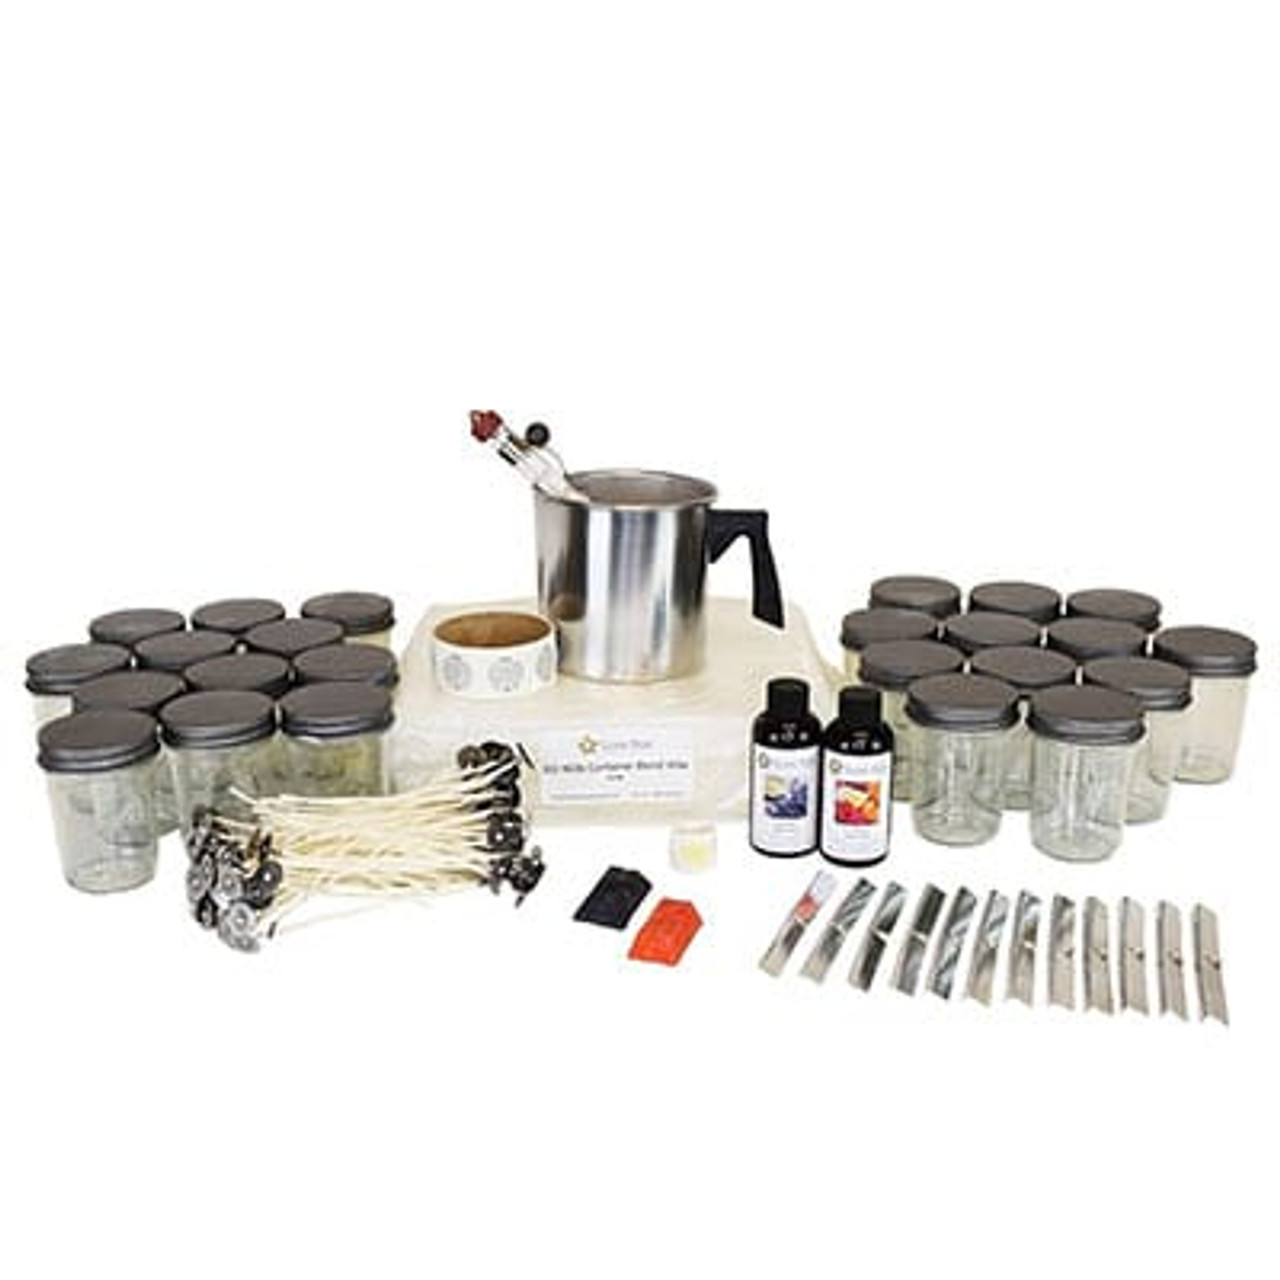 Candle Making Kits for sale in Charlotte, North Carolina